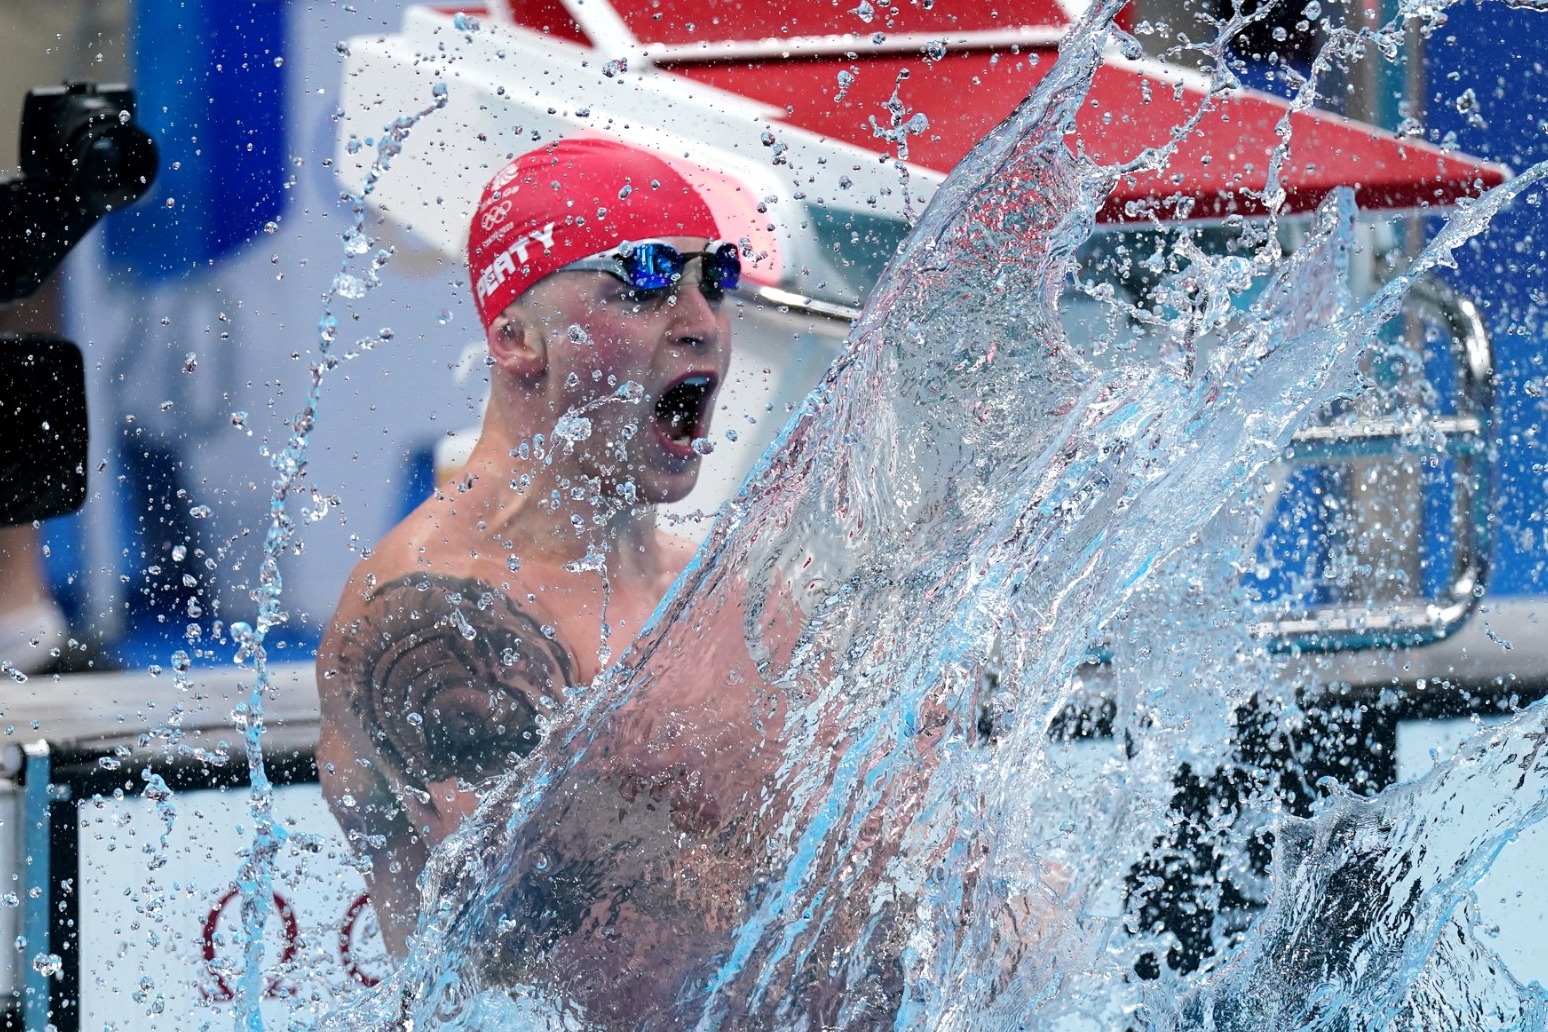 Adam Peaty awarded OBE after Tokyo Olympics title defence in 100m breaststroke 